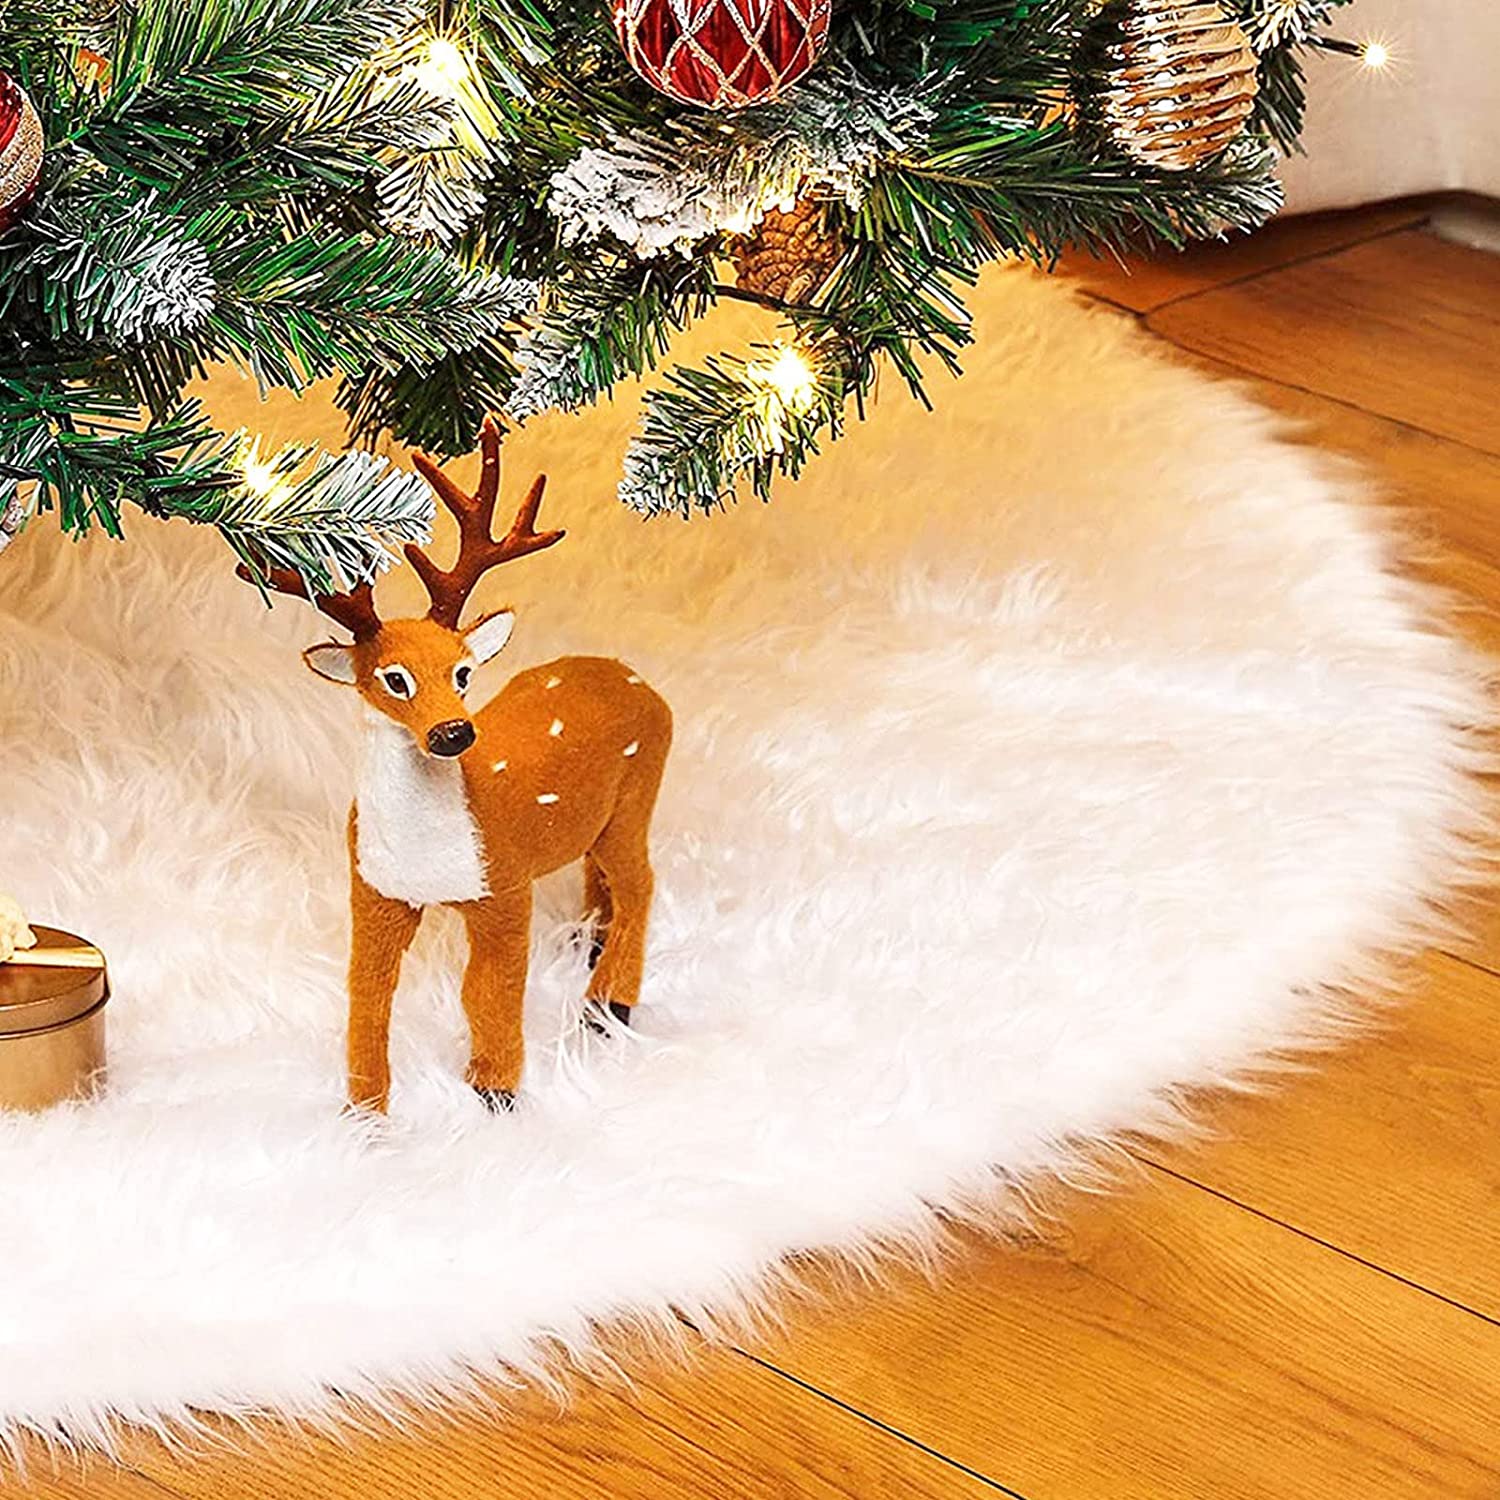 Details about   Christmas Tree Skirt White Plush Floor Mat Cover Xmas Home Party Ornament Decor 